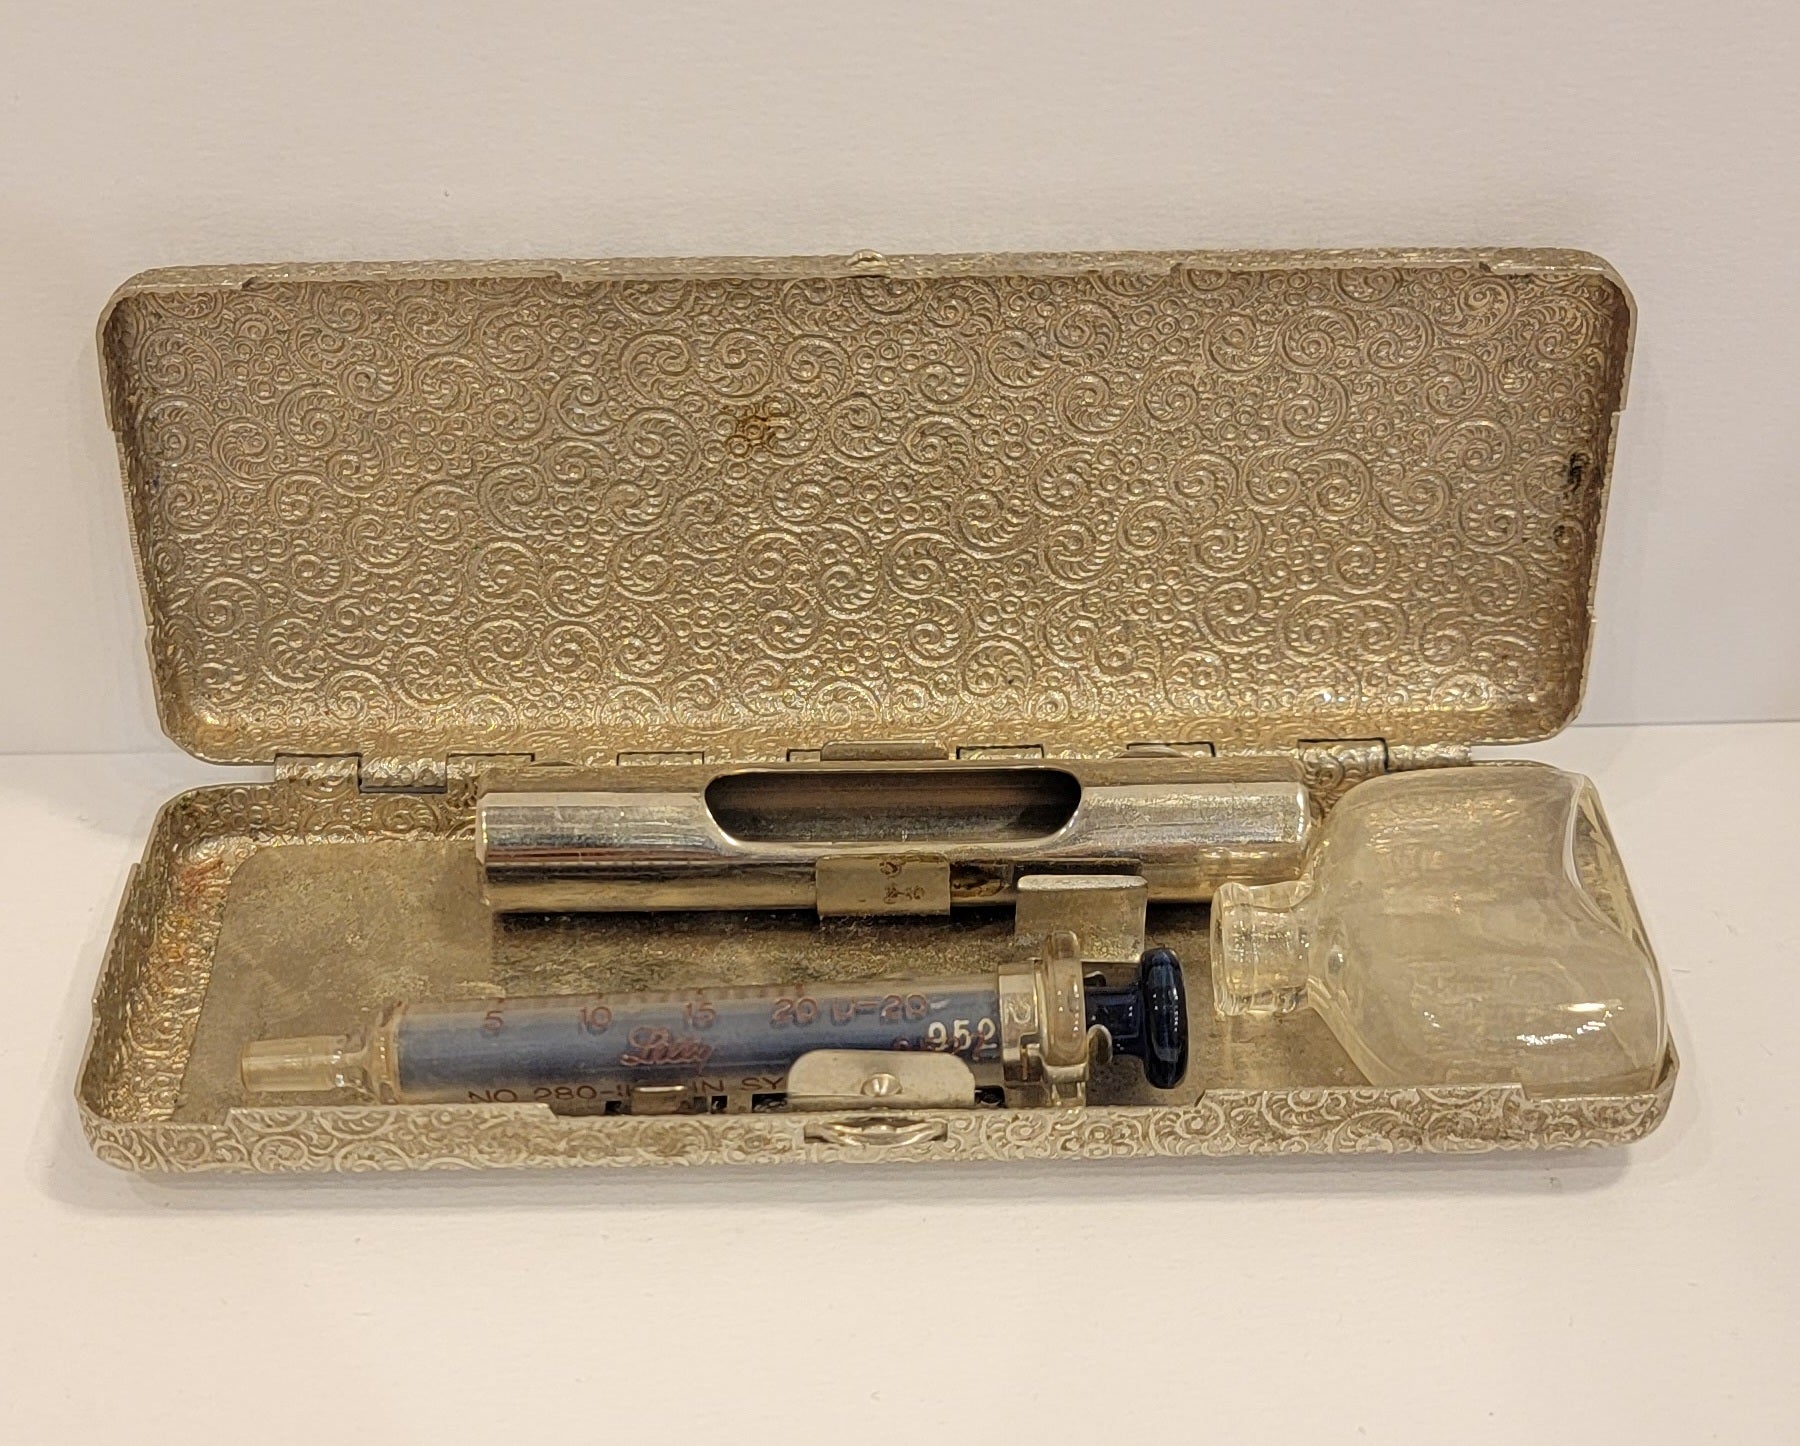 Antique 1915 Eli Lily Aseptic Dermatic Spring Case